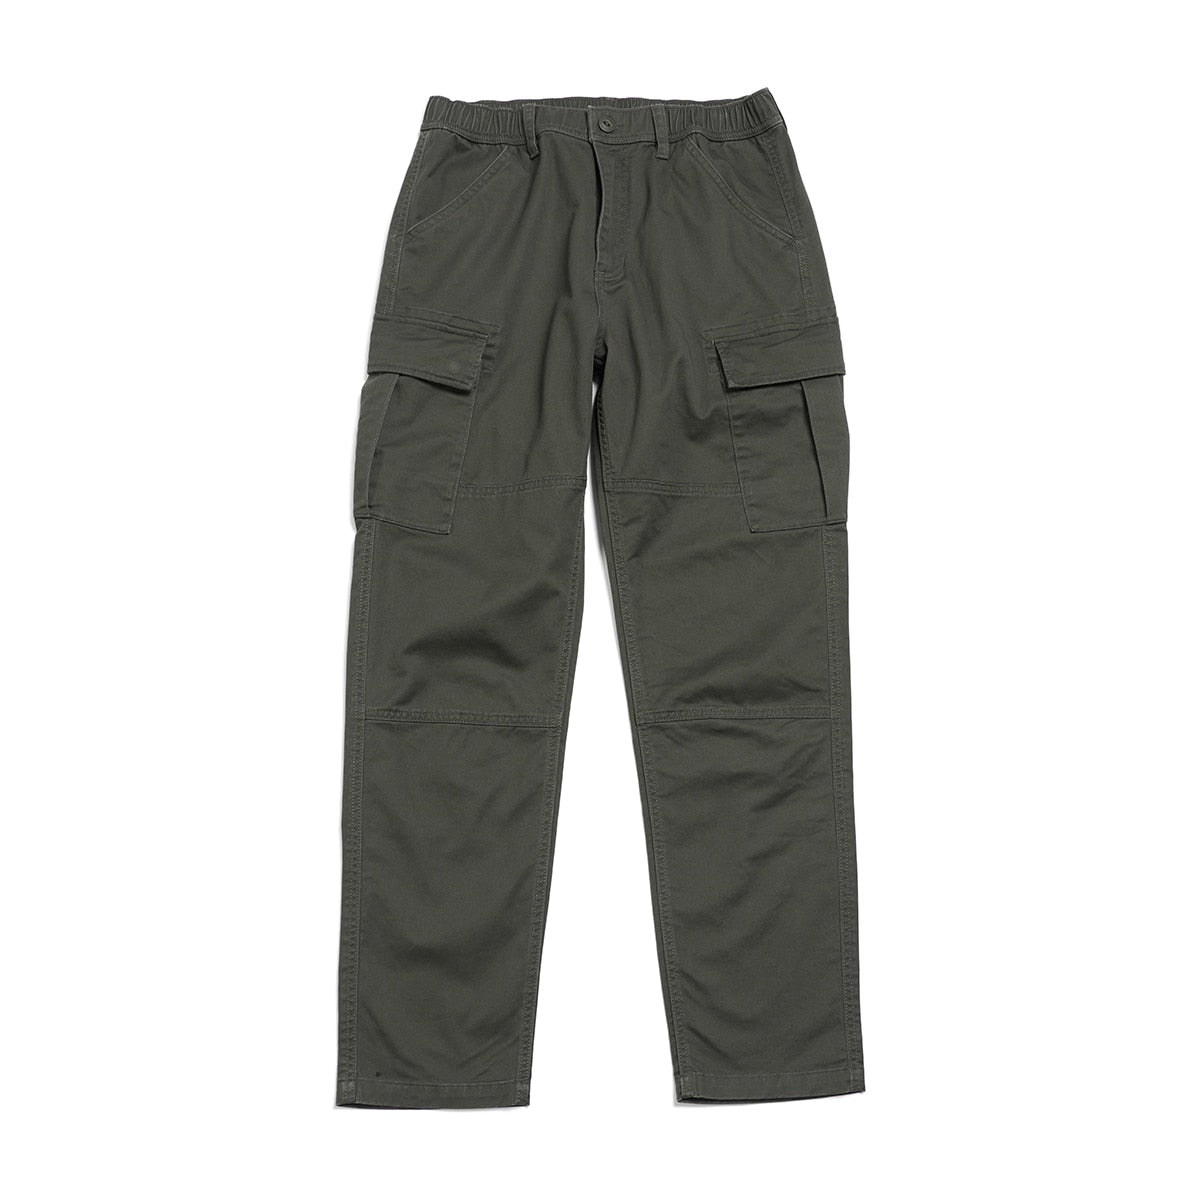 Straight Cargo Pants Men Tactical Hiking Multi Pockets Outdoor Elastic Waist Trousers